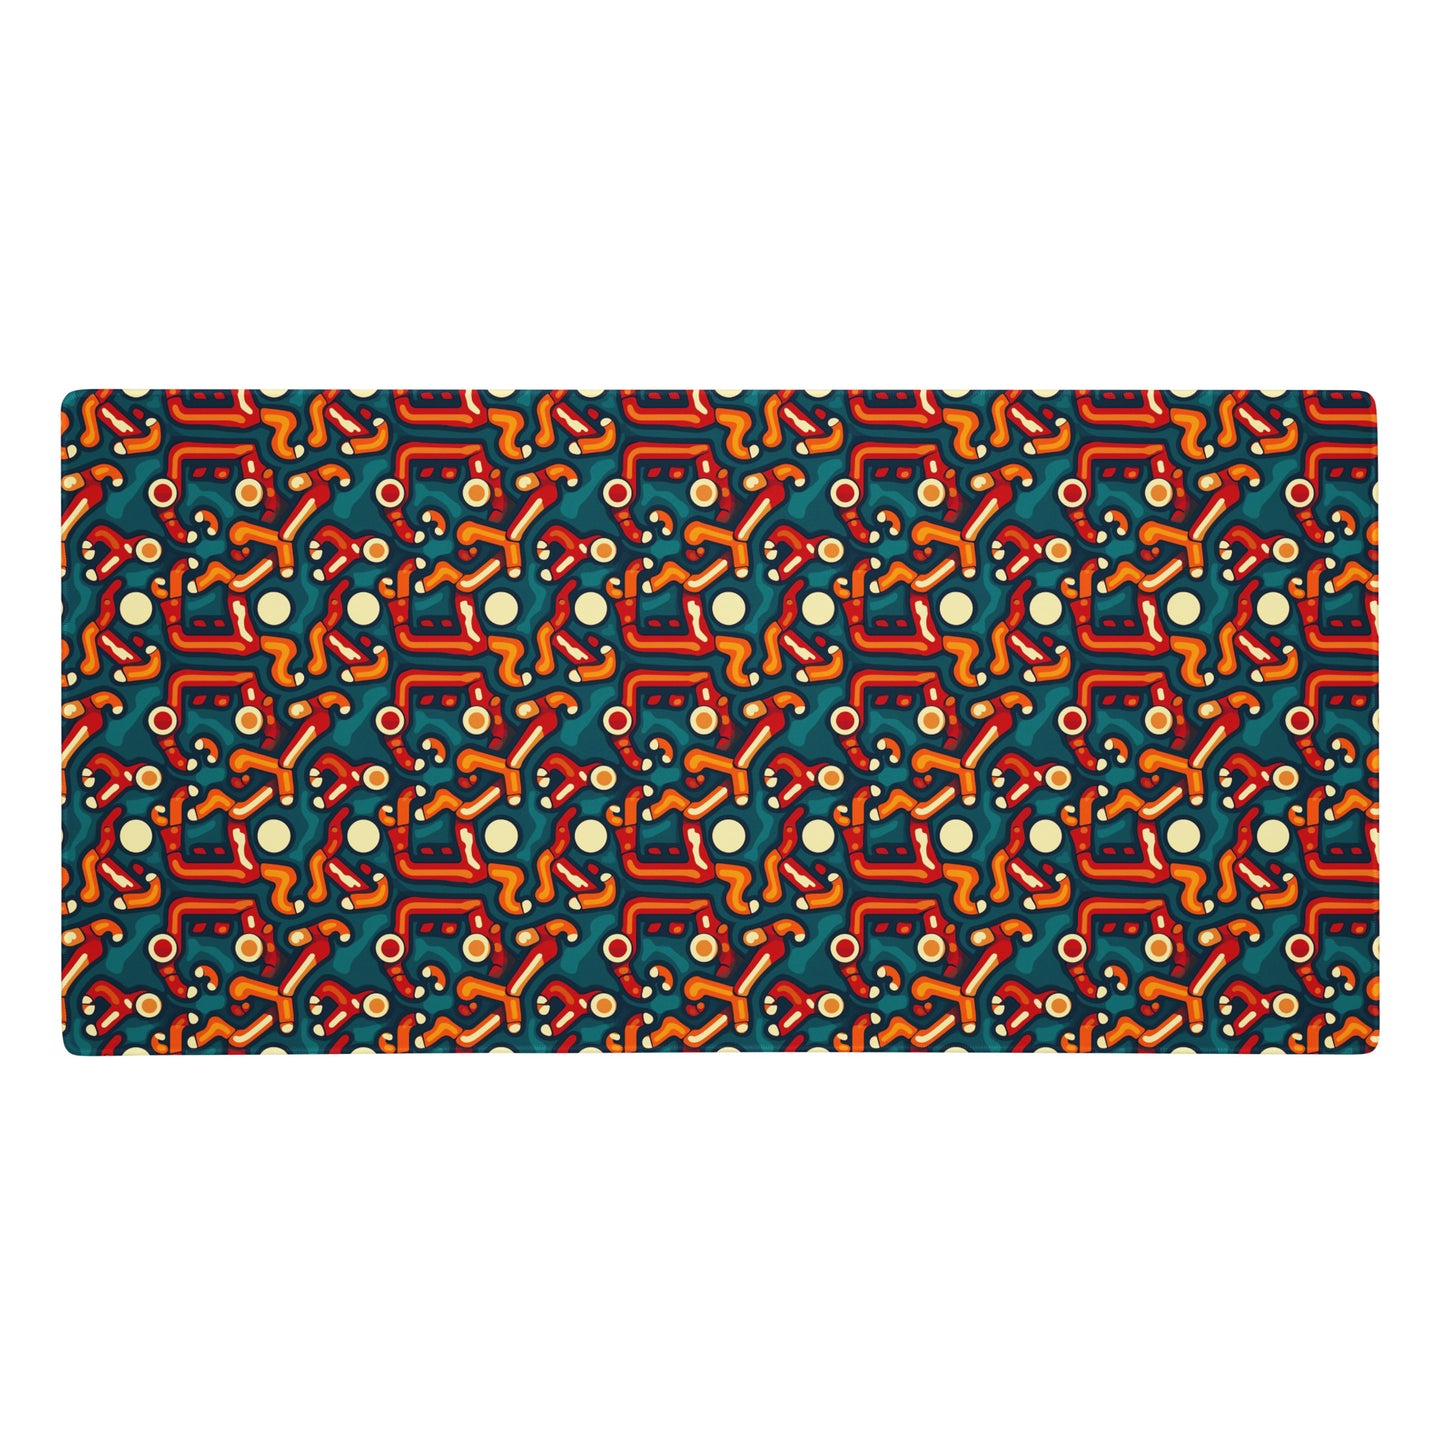 A 36" x 18" desk pad with abstract line art on it. Red, Orange and Teal in color.